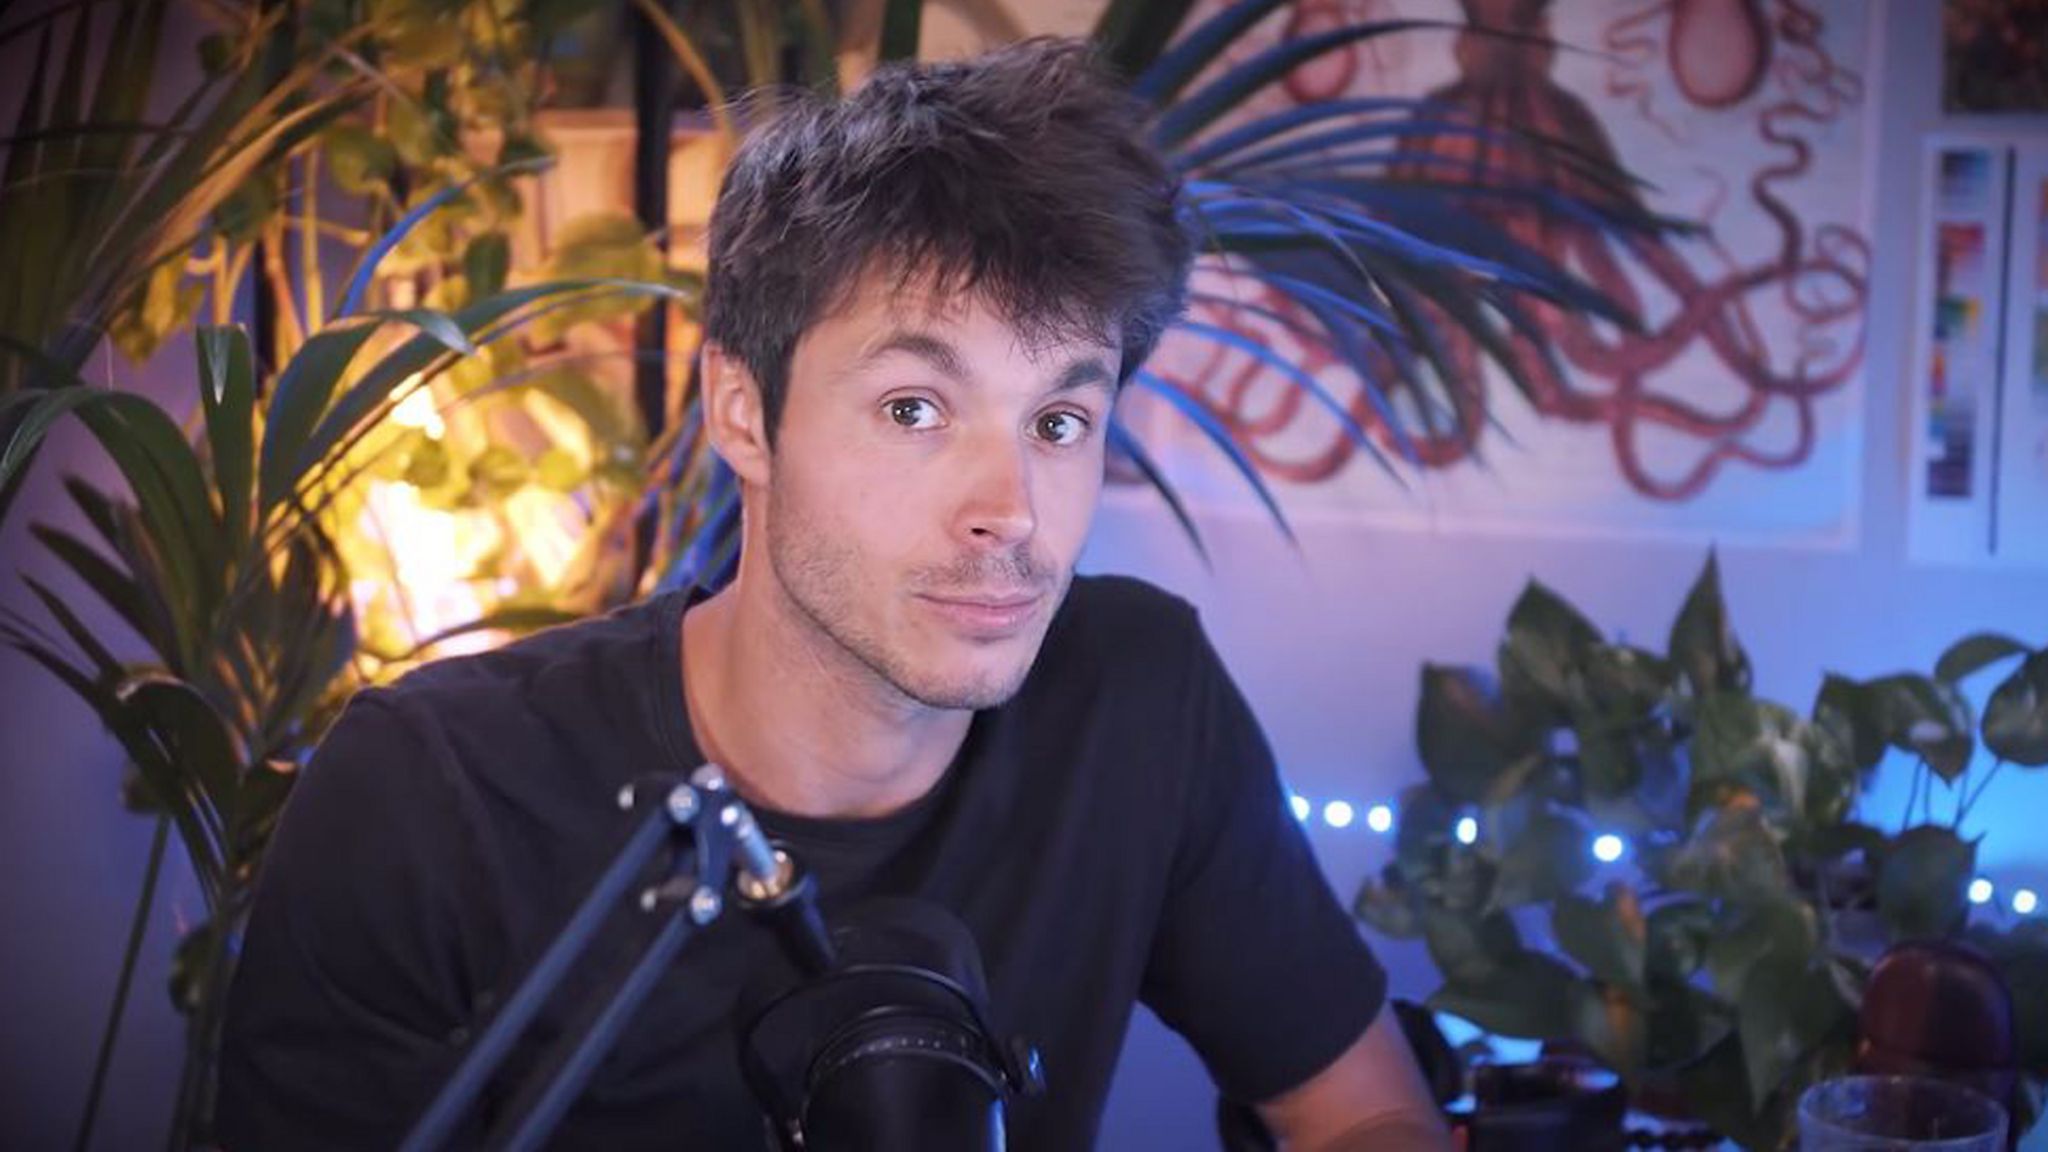 Image of a YouTuber sitting in a dimly lit room with a microphone in front of him and pot plants behind him. He is looking straight at the camera and has his eyebrows raised.